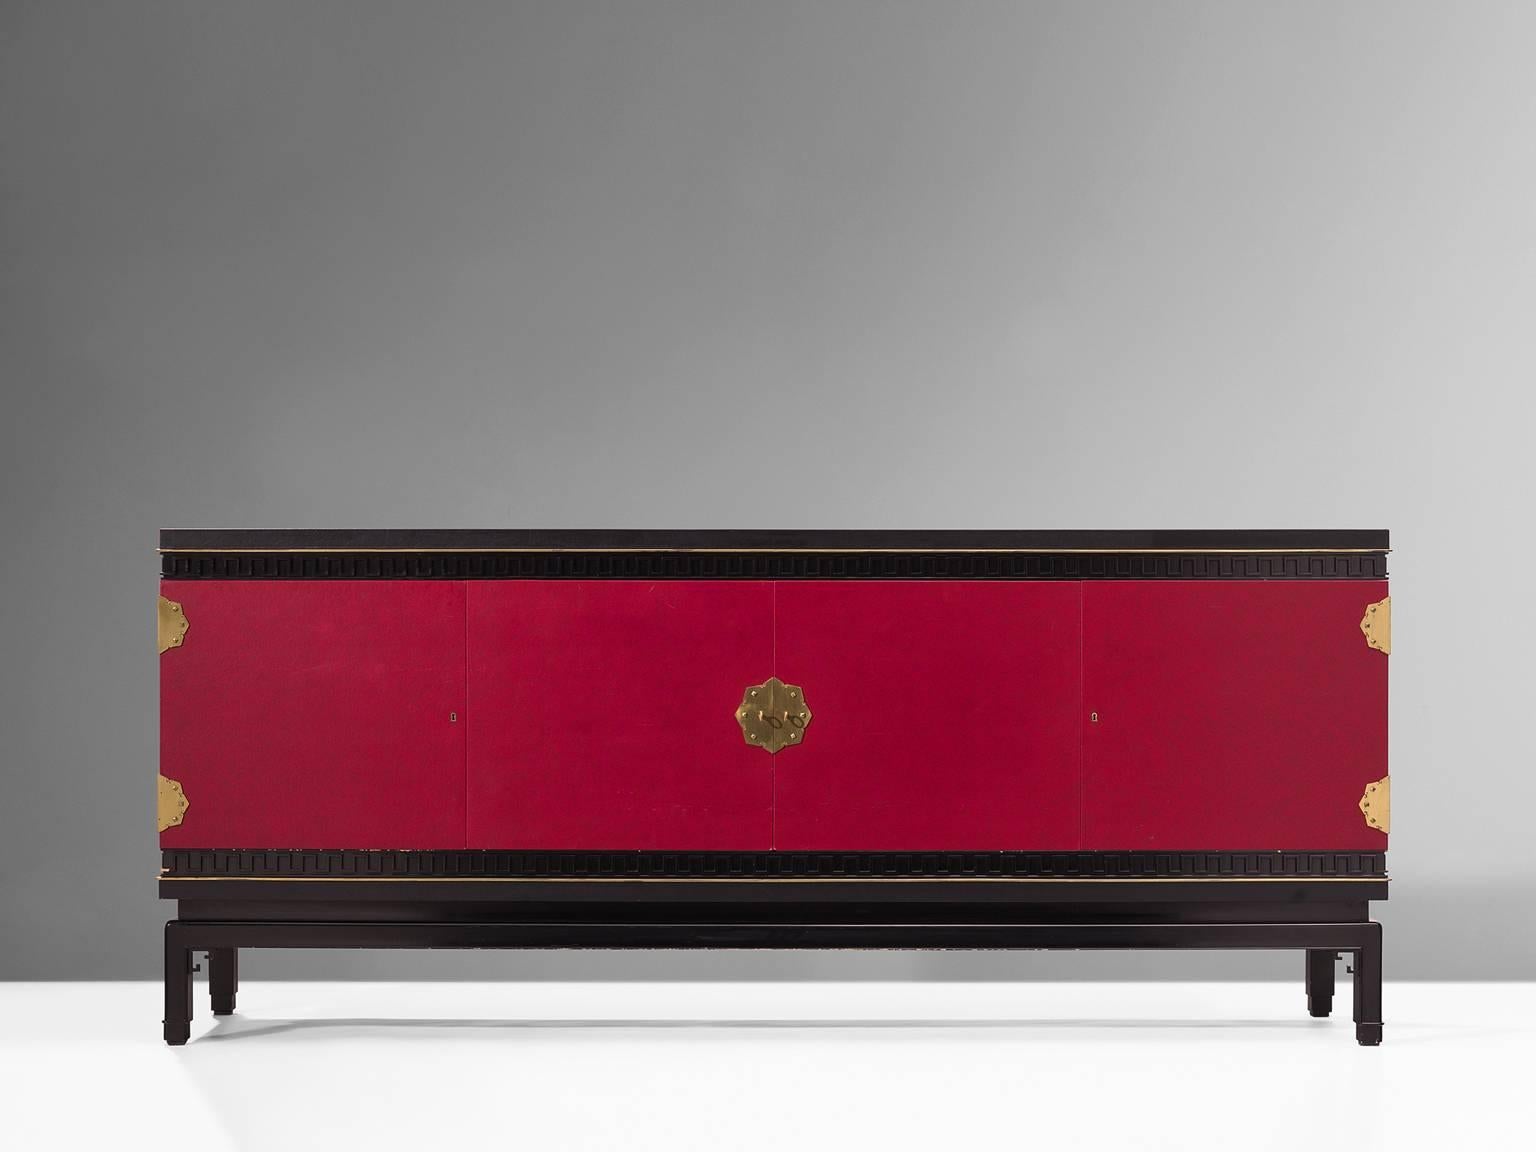 Sideboard, in oak, brass and skai, by De Coene, Belgium, 1960s. 

Rare early Art Deco style sideboard in oak and skai, signed by Belgian De Coene Frères. This credenza shows a beautiful deep red colour with brass details. The detailing has hints of